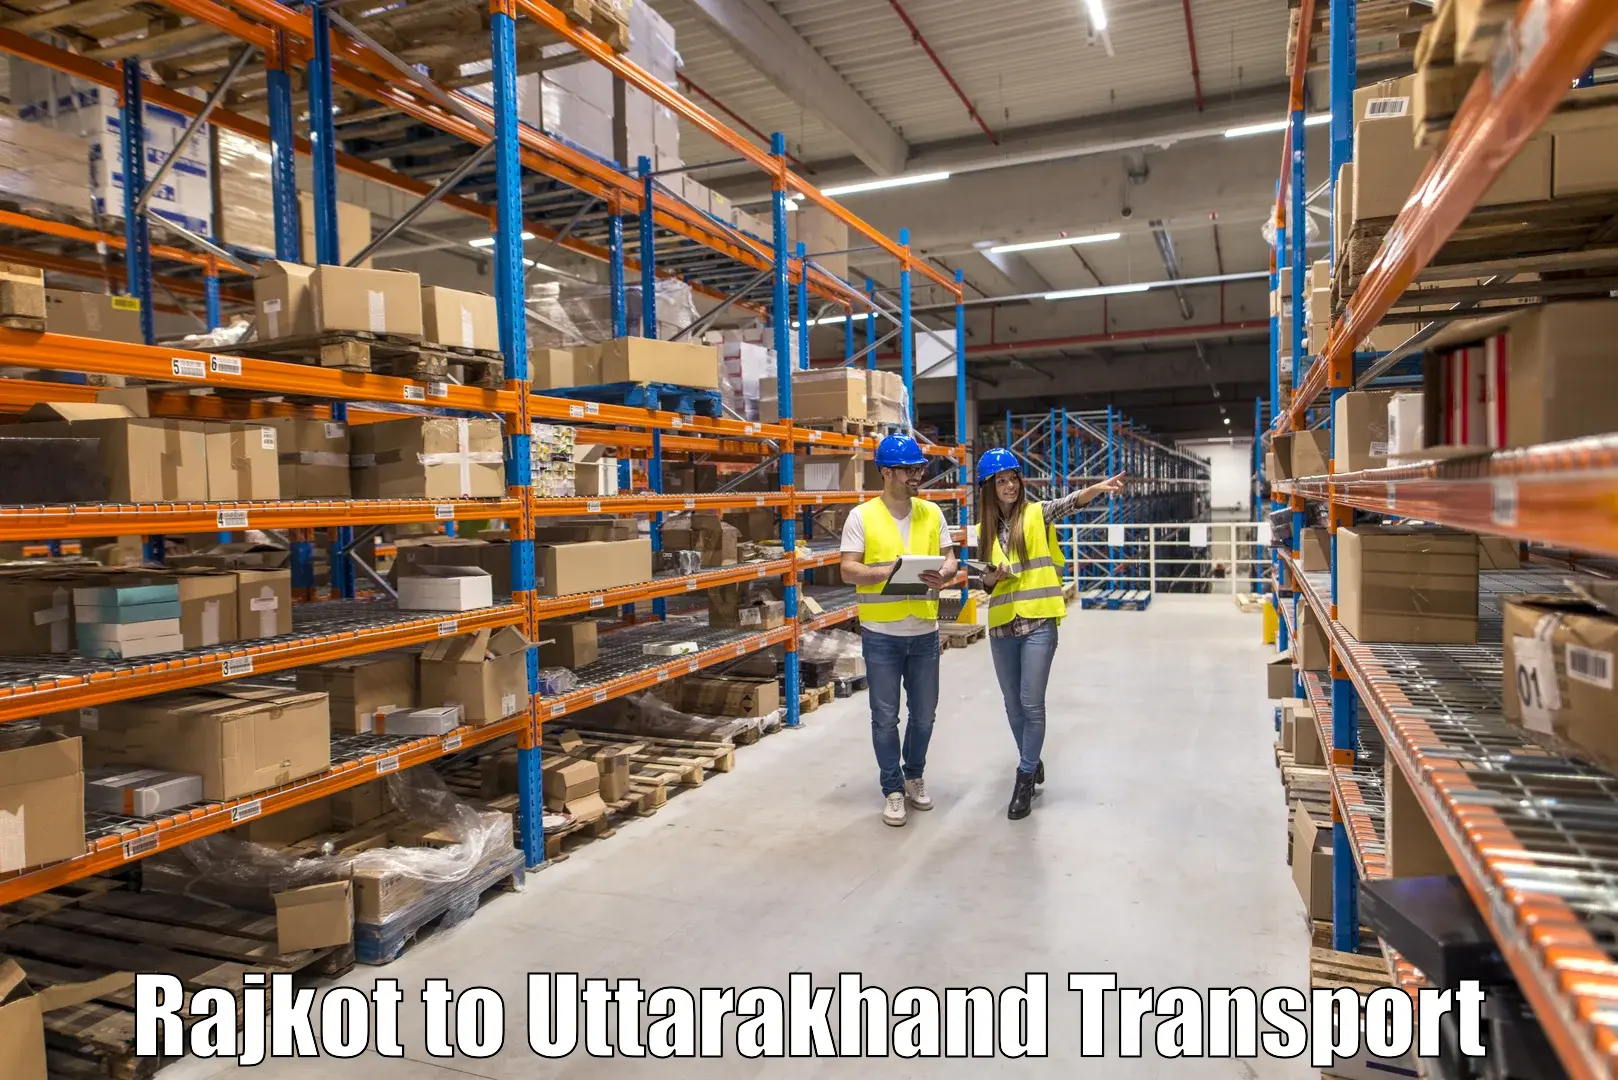 Transport bike from one state to another Rajkot to Uttarakhand